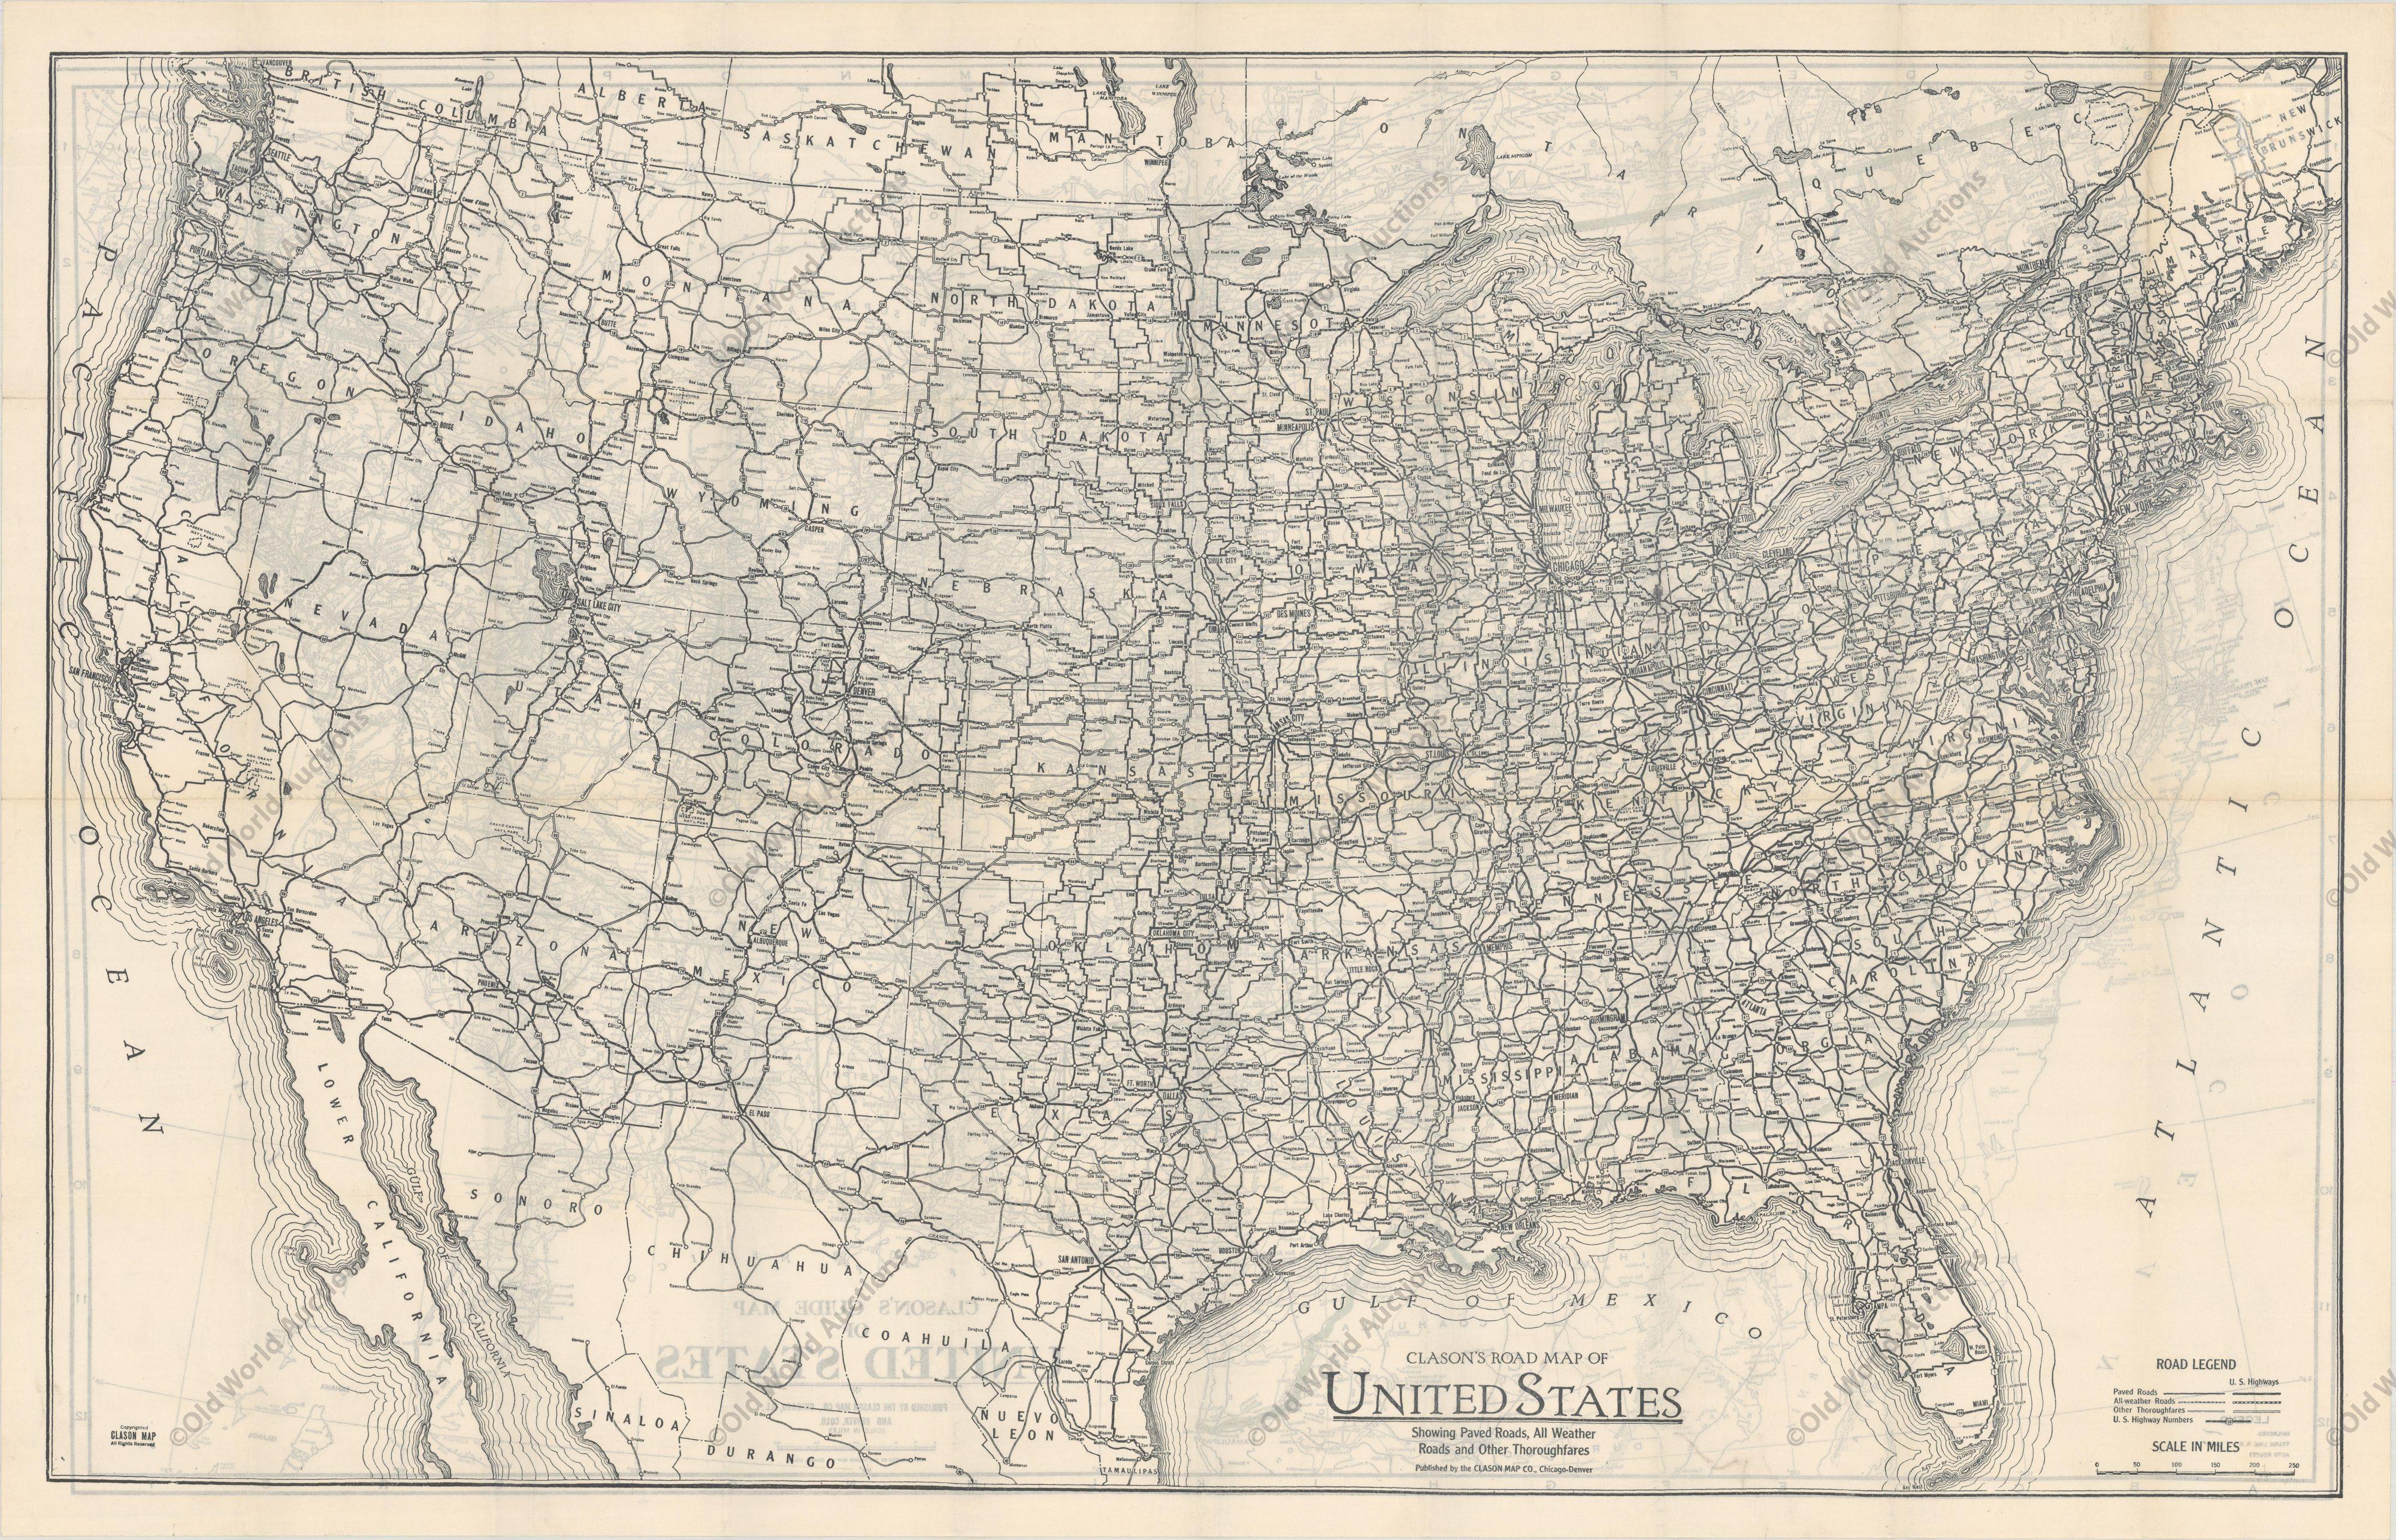 This is the “New Census Edition” of Clason’s United States Green Guide. It features two large maps of the United States on a single sheet. 

The recto map shows the complete road network in the country with a legend identifying paved roads, all